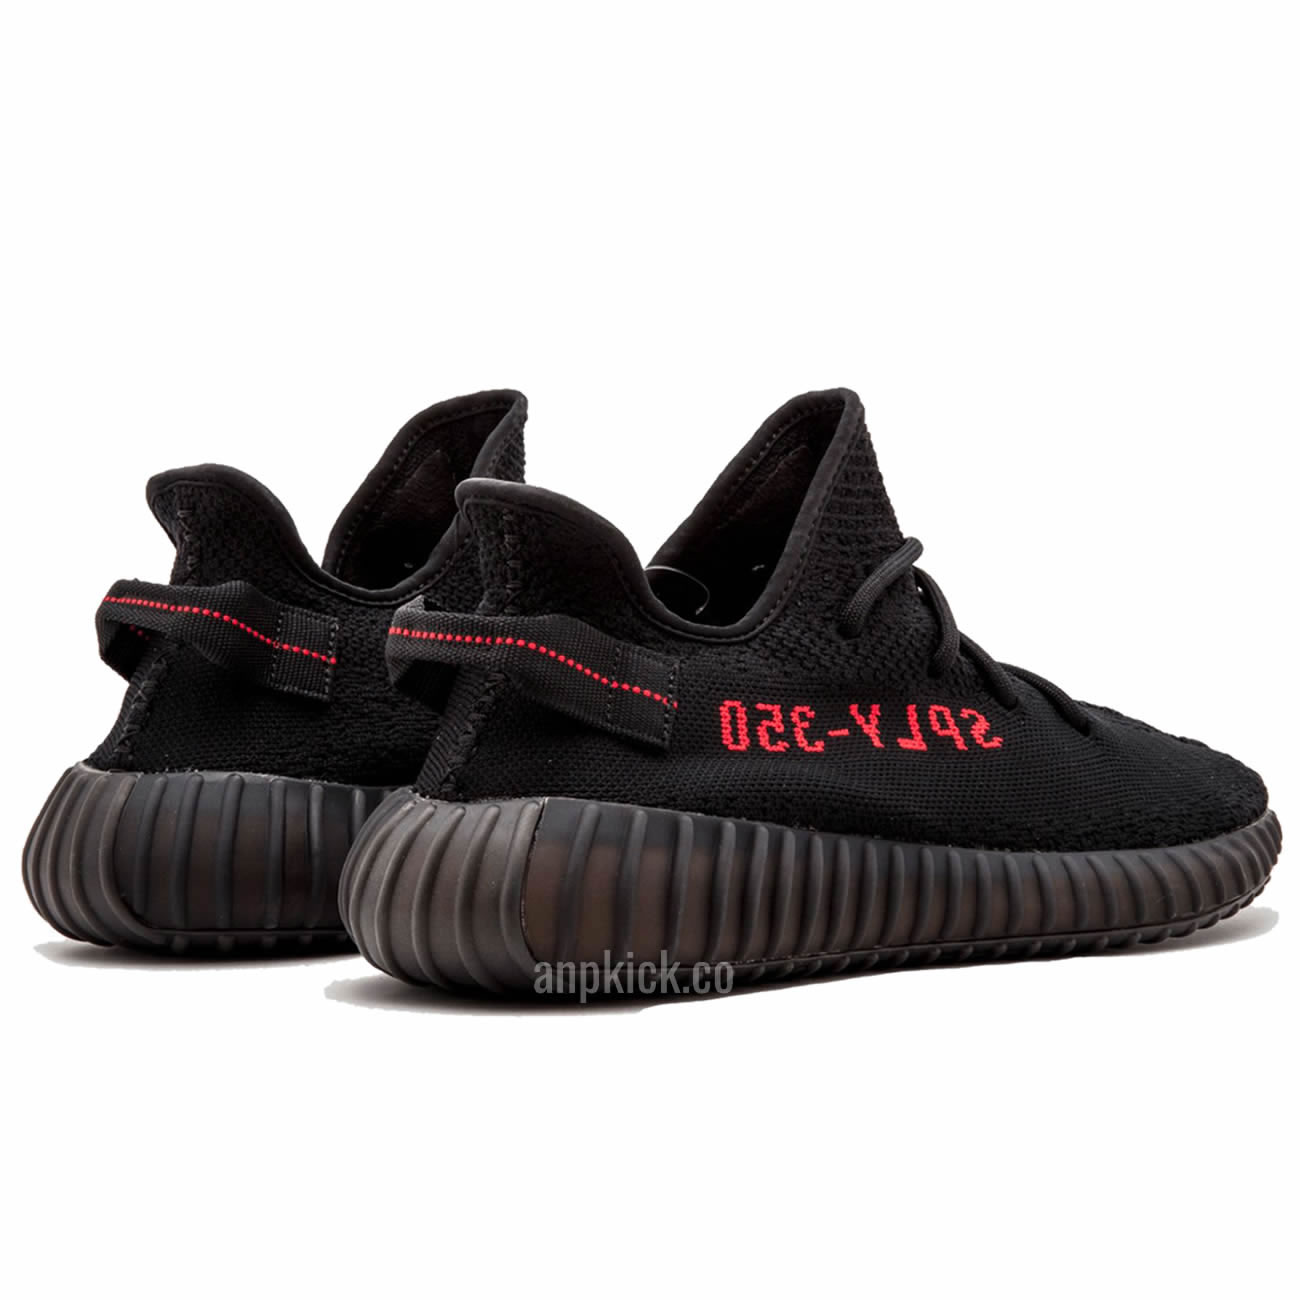 Yeezy Boost 350 V2 Bred "Black/Red" 2020 New Release CP9652